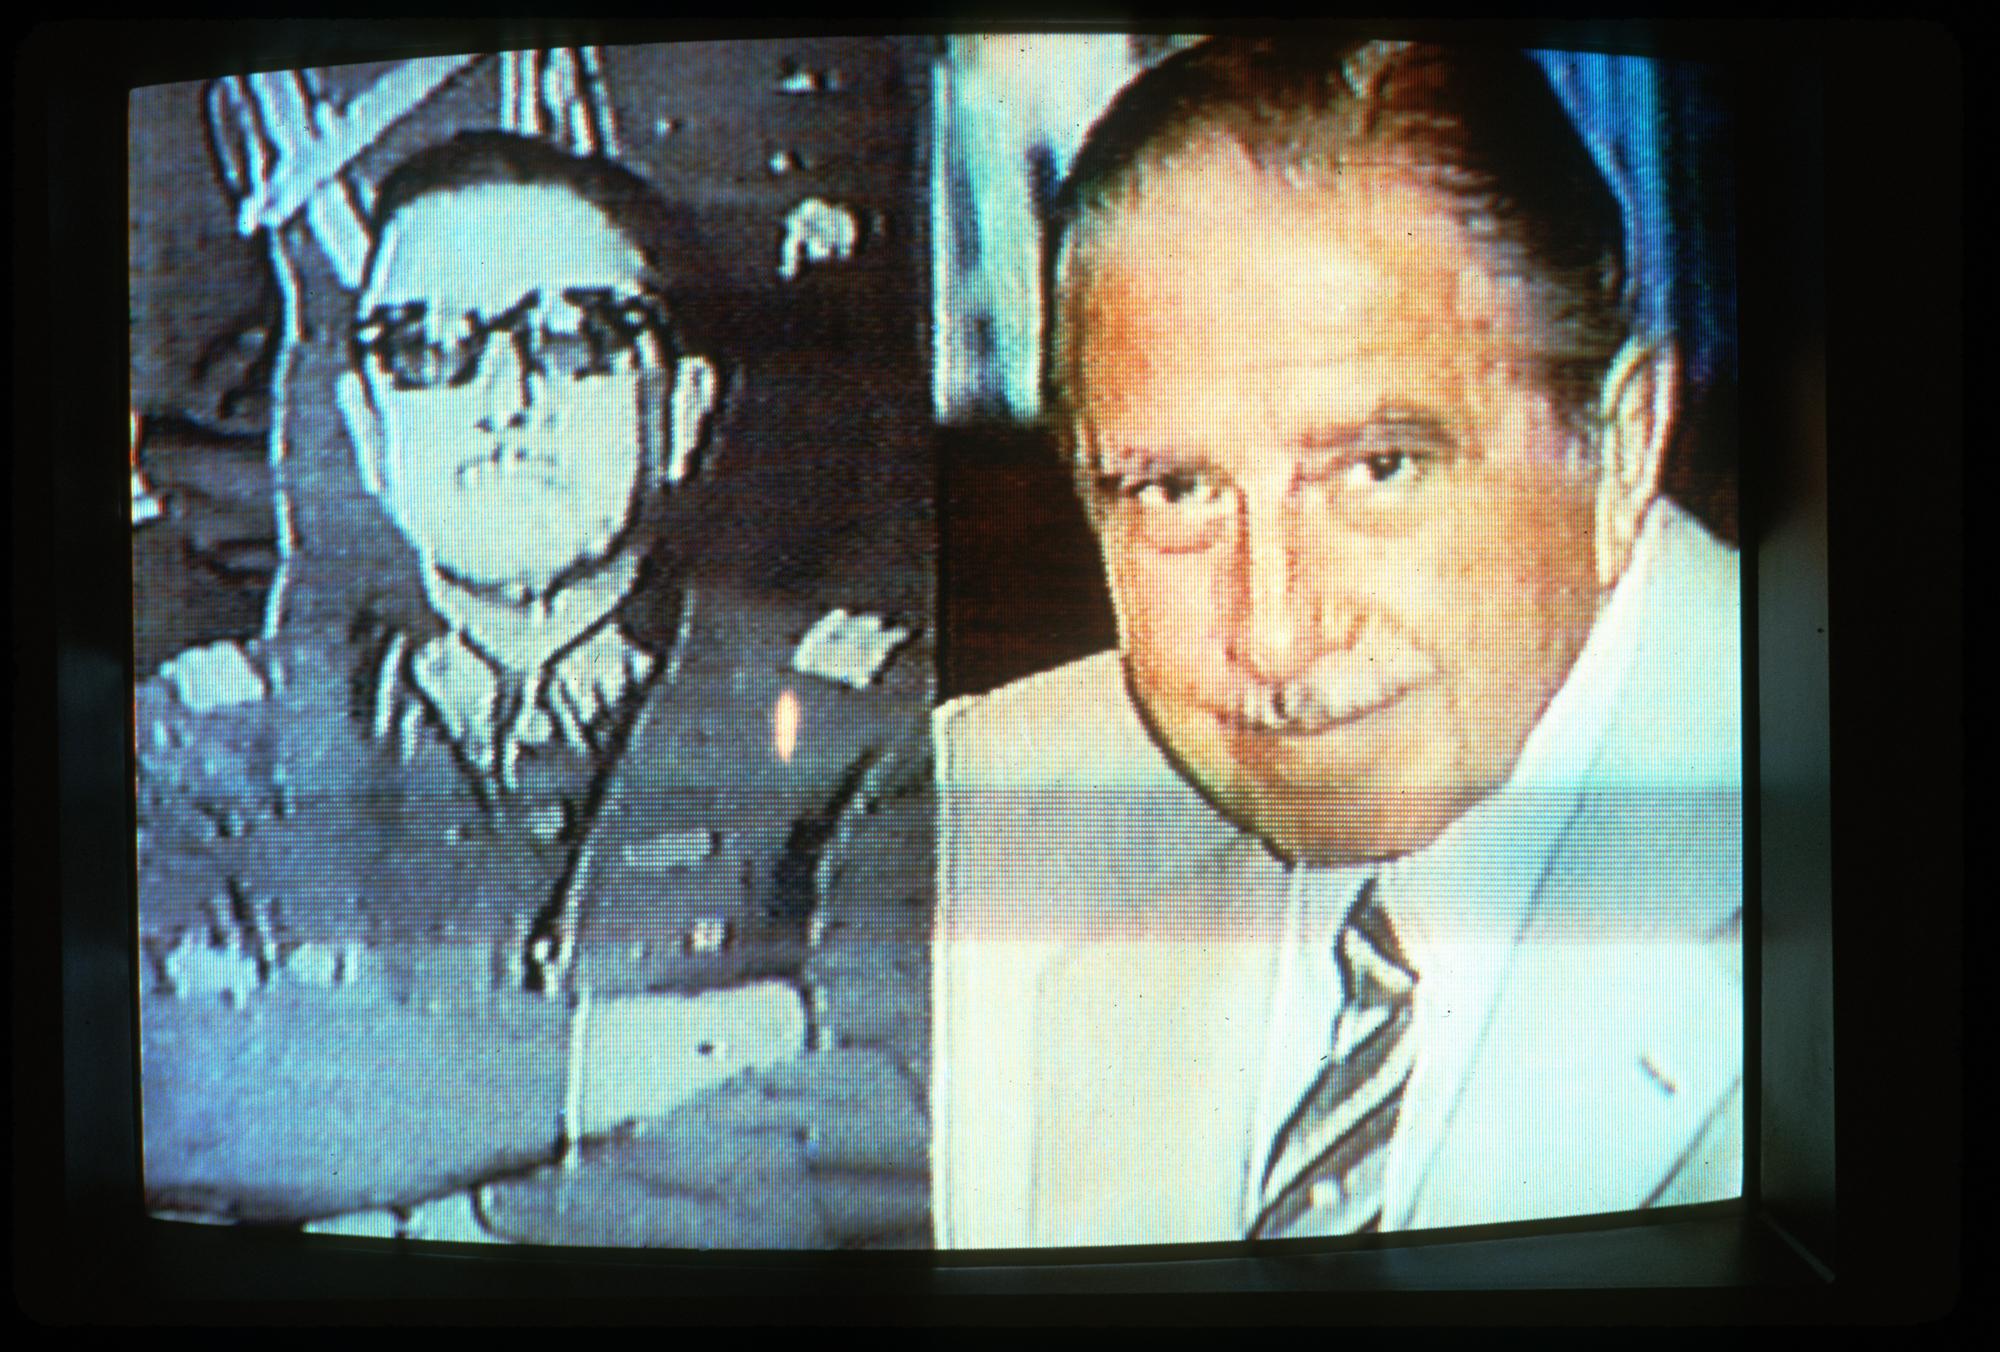 Chile - A "SI" campaign spot on television. Pinochet is...